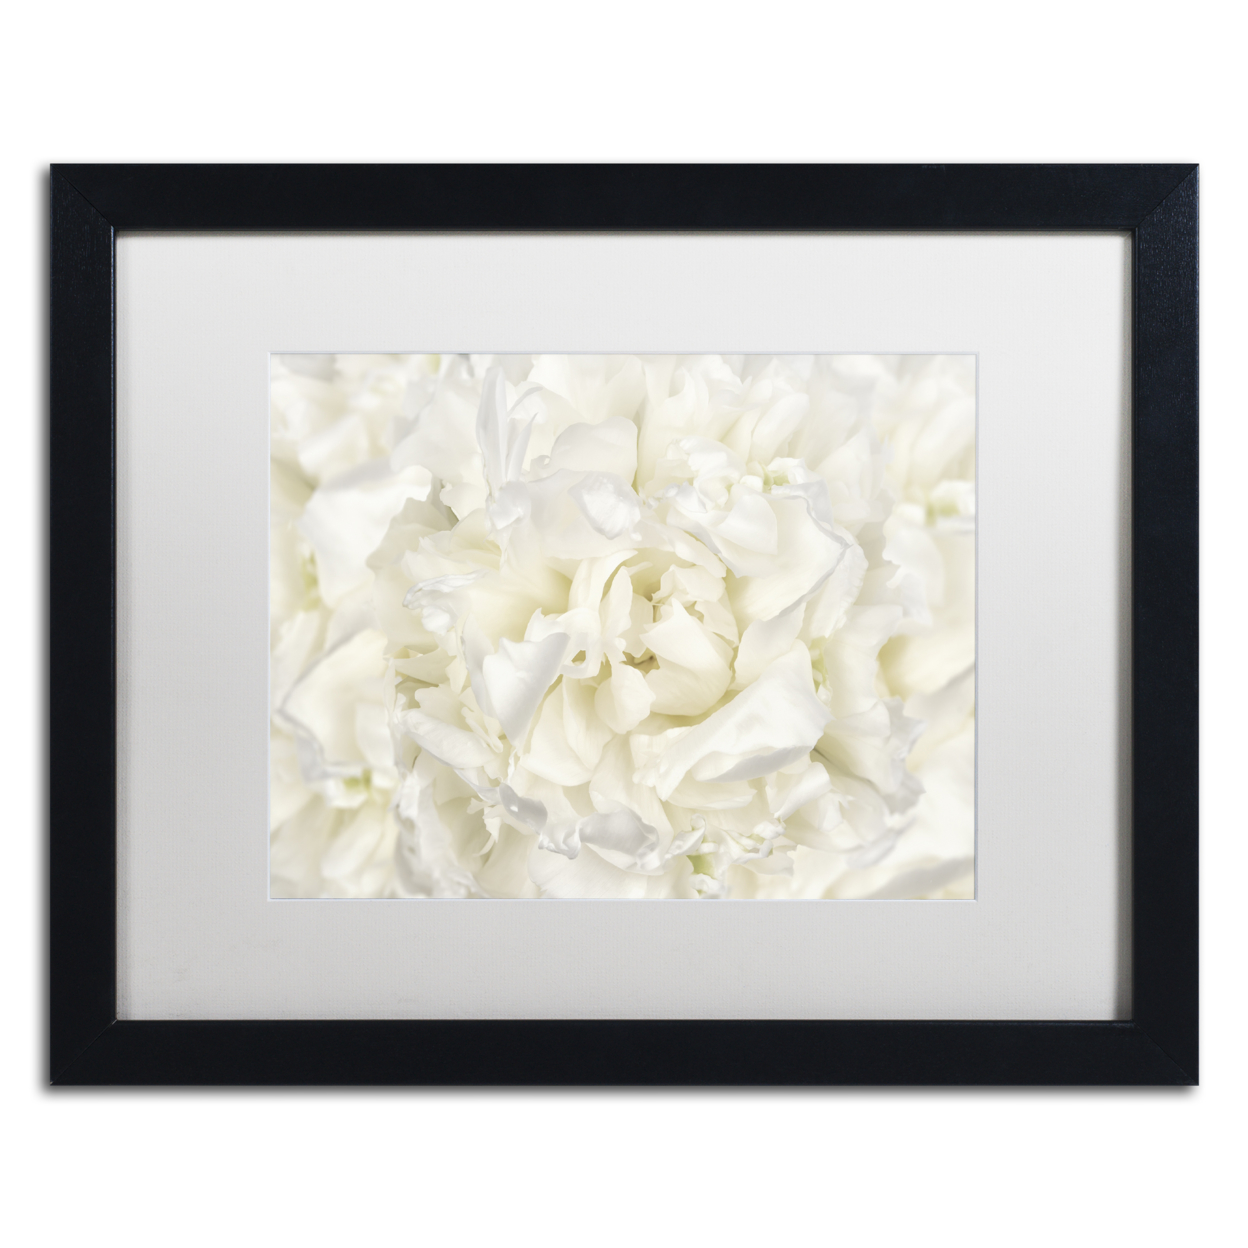 Cora Niele 'White Peony Flower' Black Wooden Framed Art 18 X 22 Inches